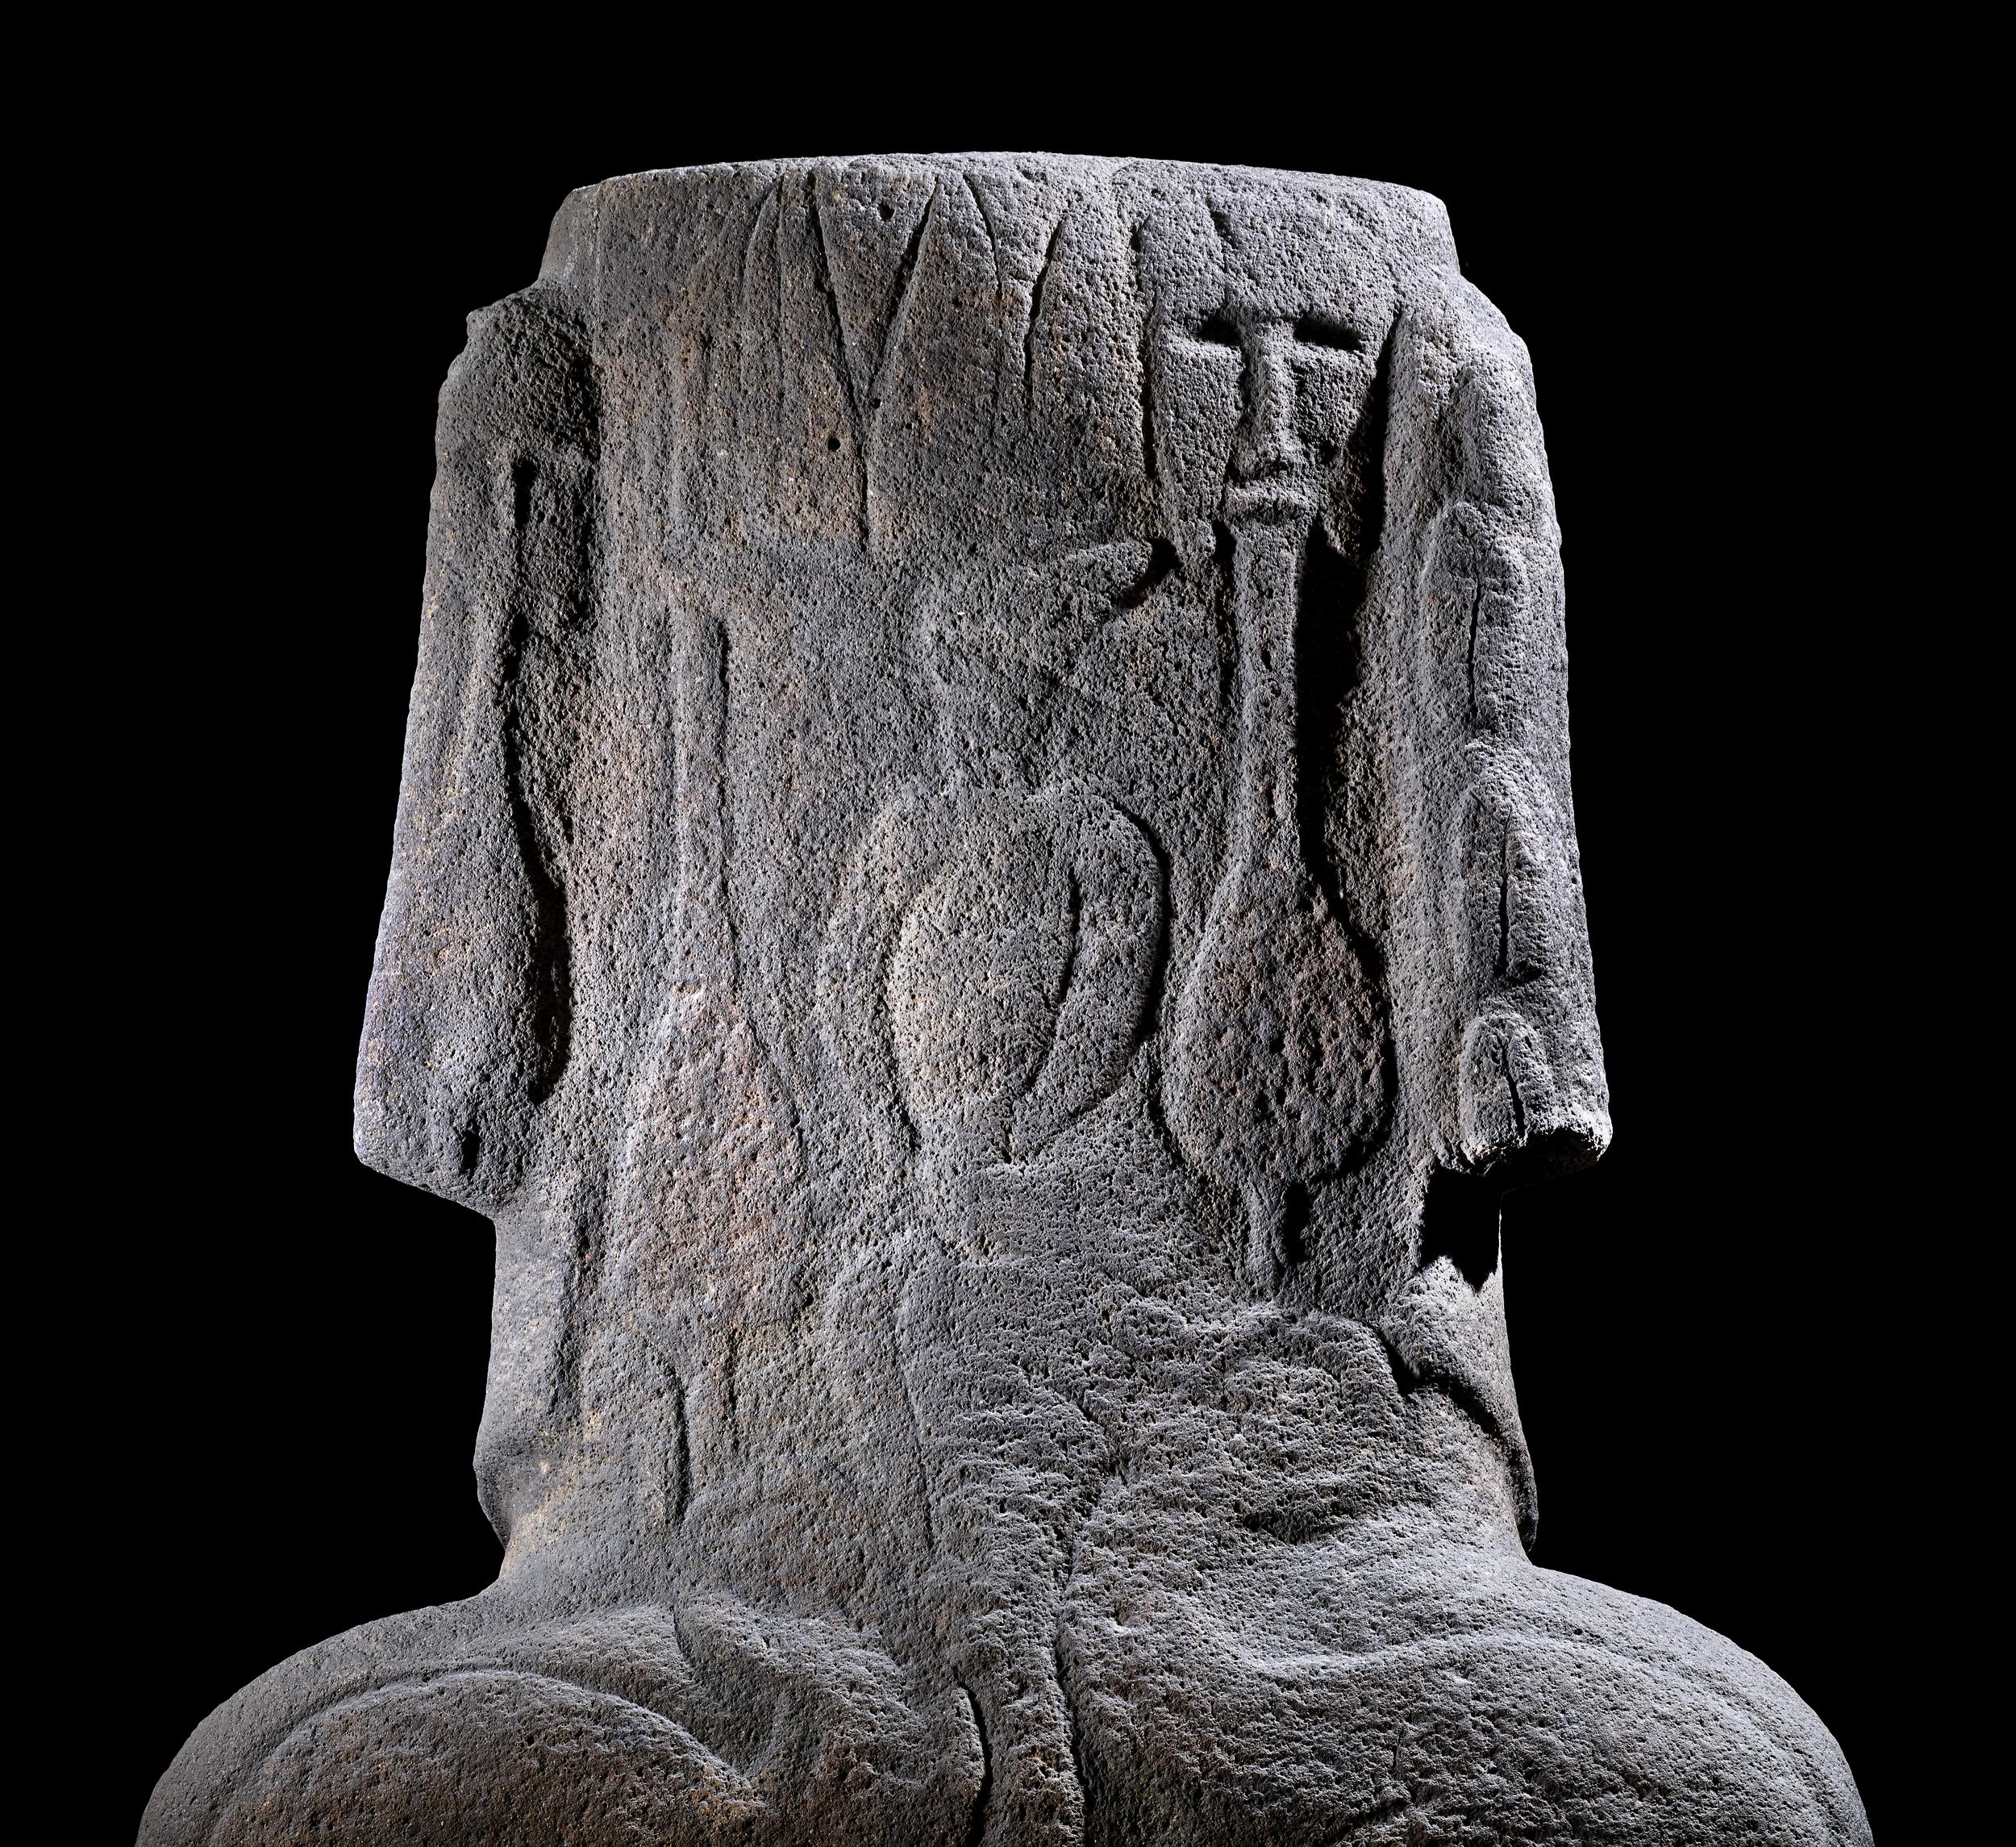 Back of head (detail), Hoa Hakananai'a ('lost or stolen friend’), Moai (ancestor figure), c. 1200 C.E., 242 x 96 x 47 cm, basalt (missing paint, coral eye sockets, and stone eyes), likely made in Rano Kao, Rapa Nui (Easter Island), found in the ceremonial center Orongo (© The Trustees of the British Museum)